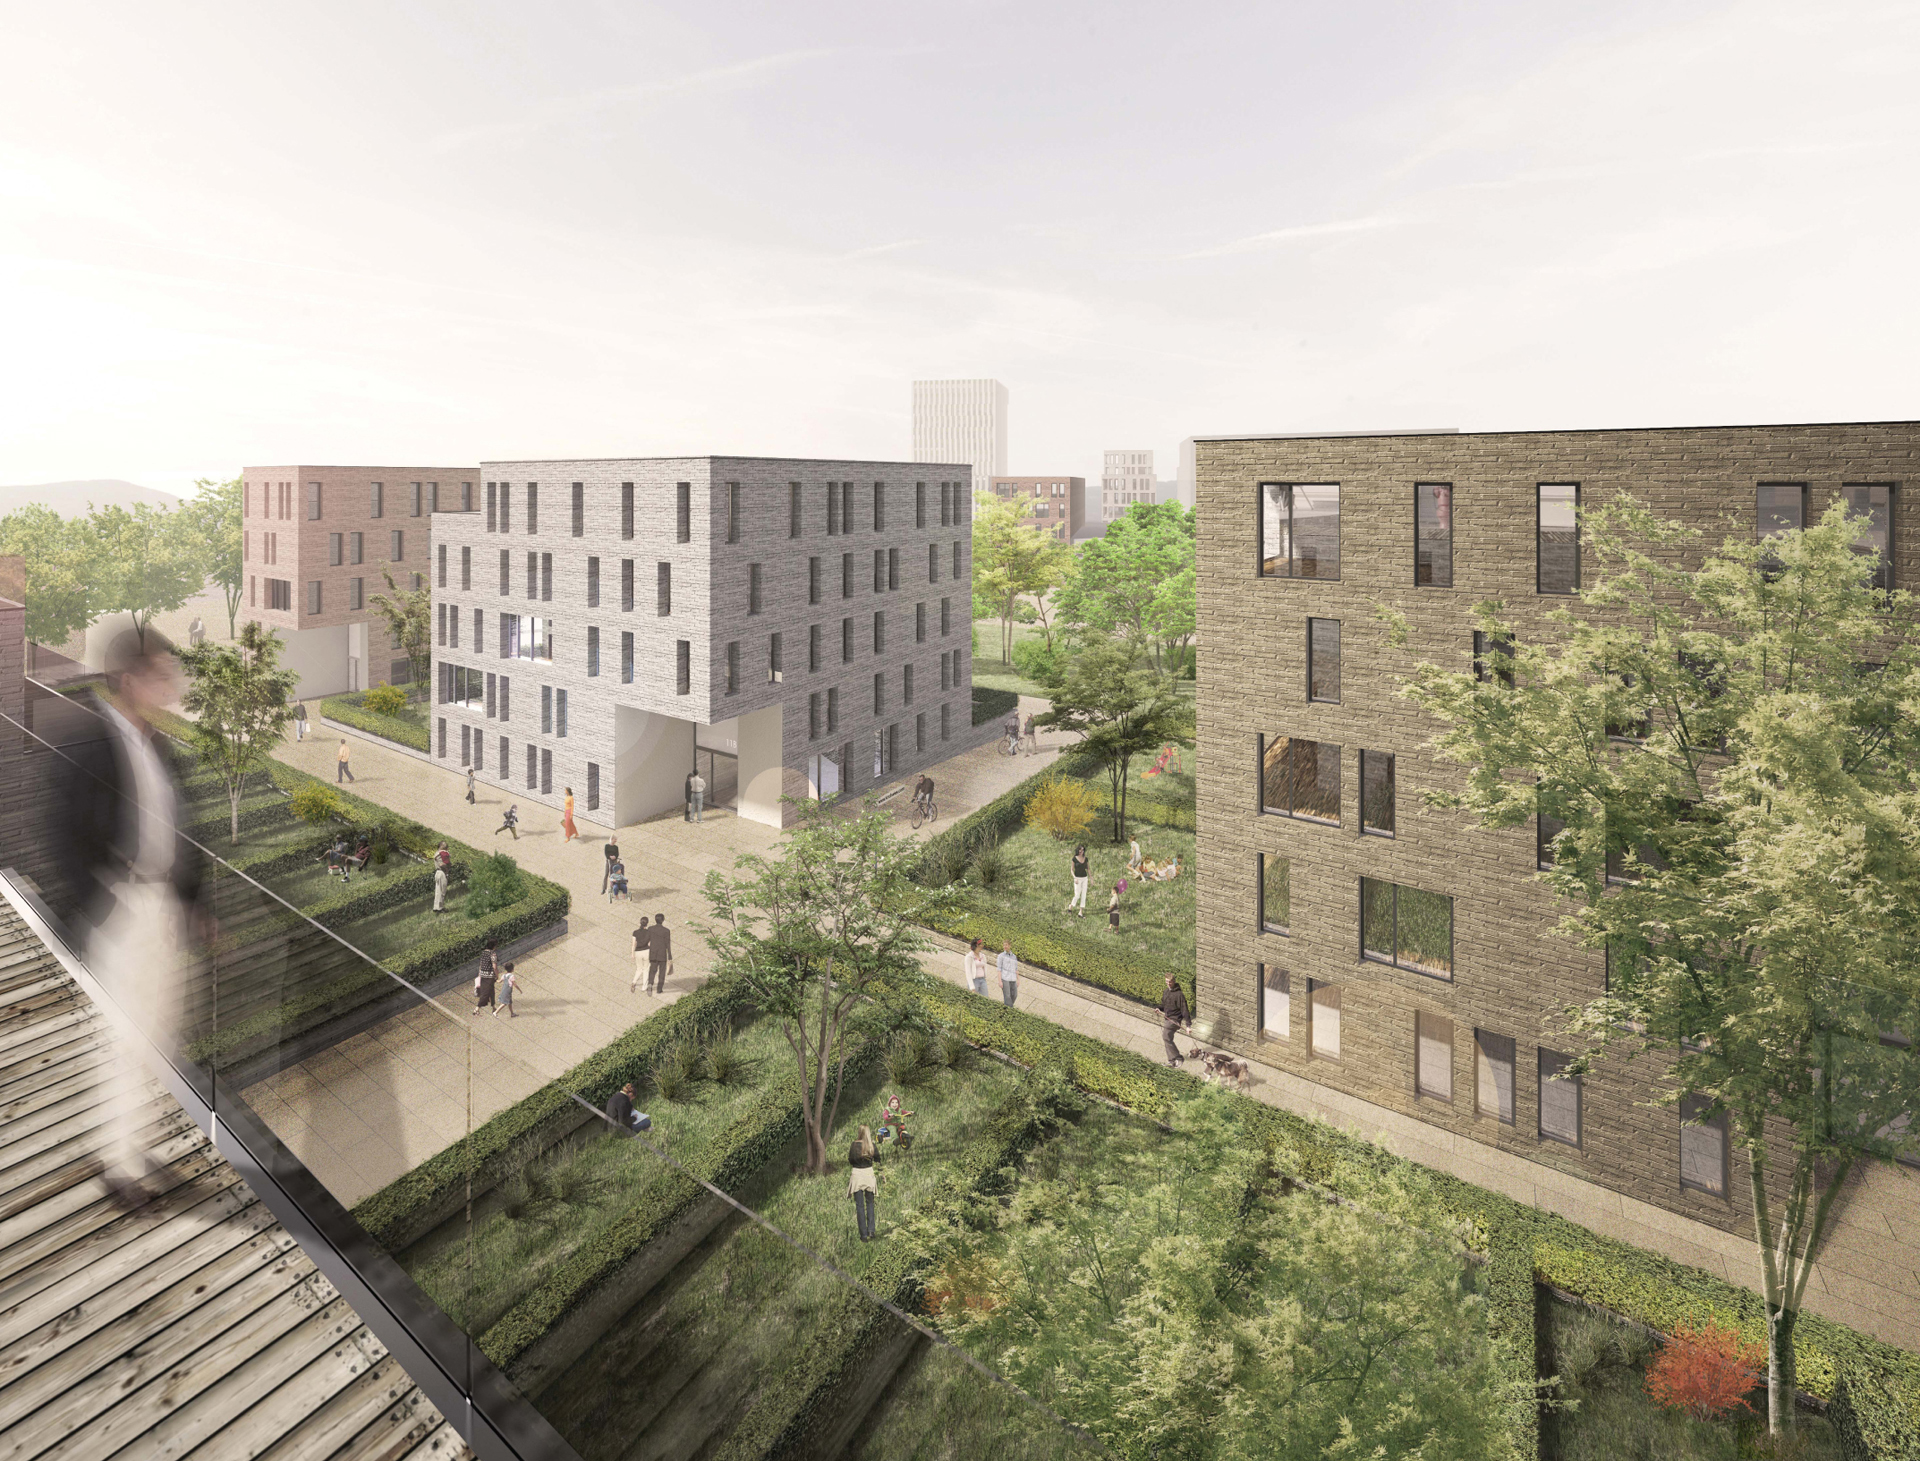 Competition phase: perspective of the garden quarter